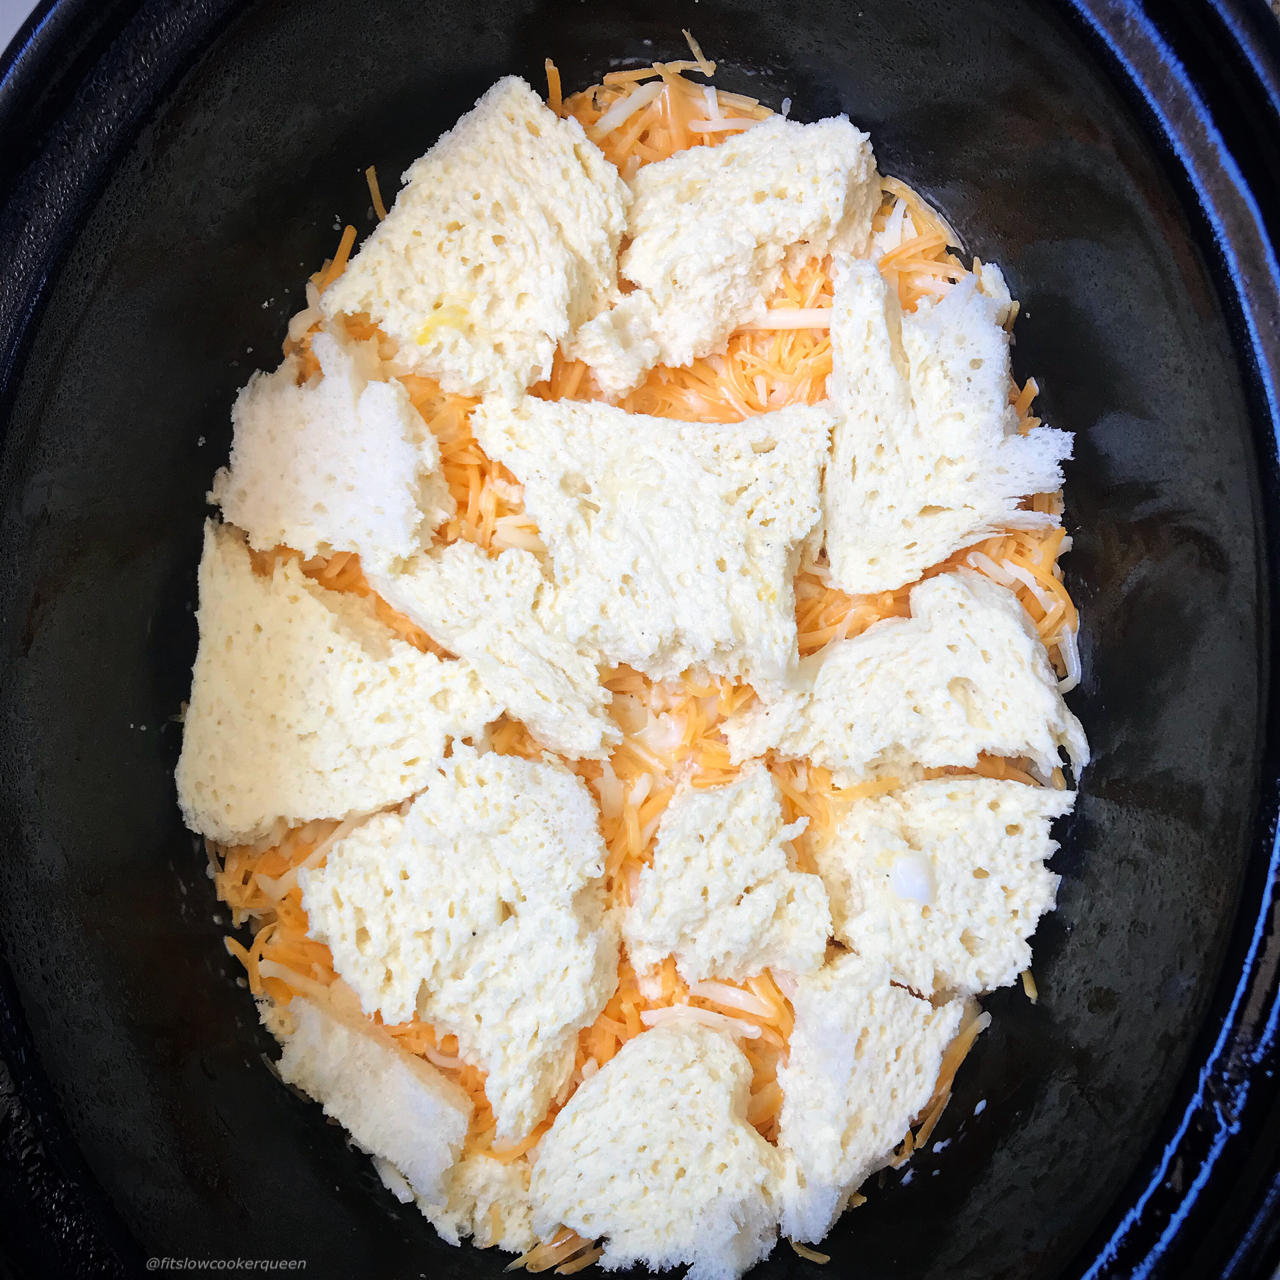 Slow cooker cheese souffle is an easy, flavorful recipe that's also a crowd pleaser. Breakfast, brunch, lunch, dinner...serve this souffle anytime of the day.